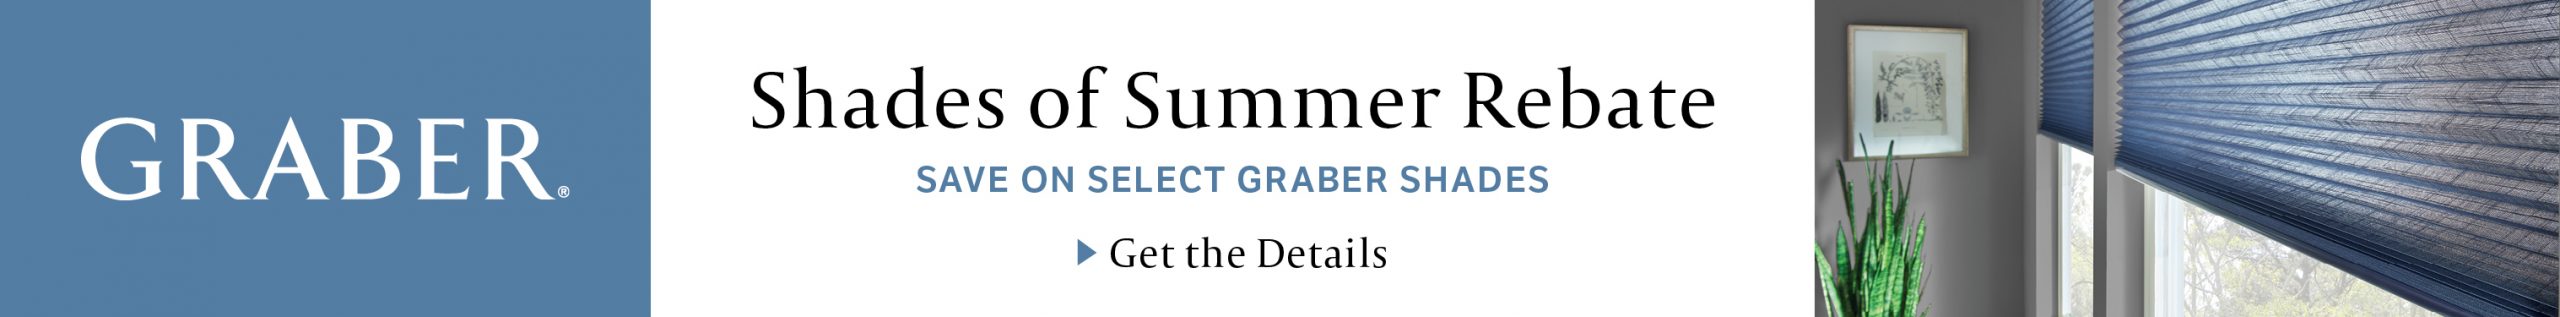 Shades of Summer Rebate. Save on Select Graber Shades. Get the details.